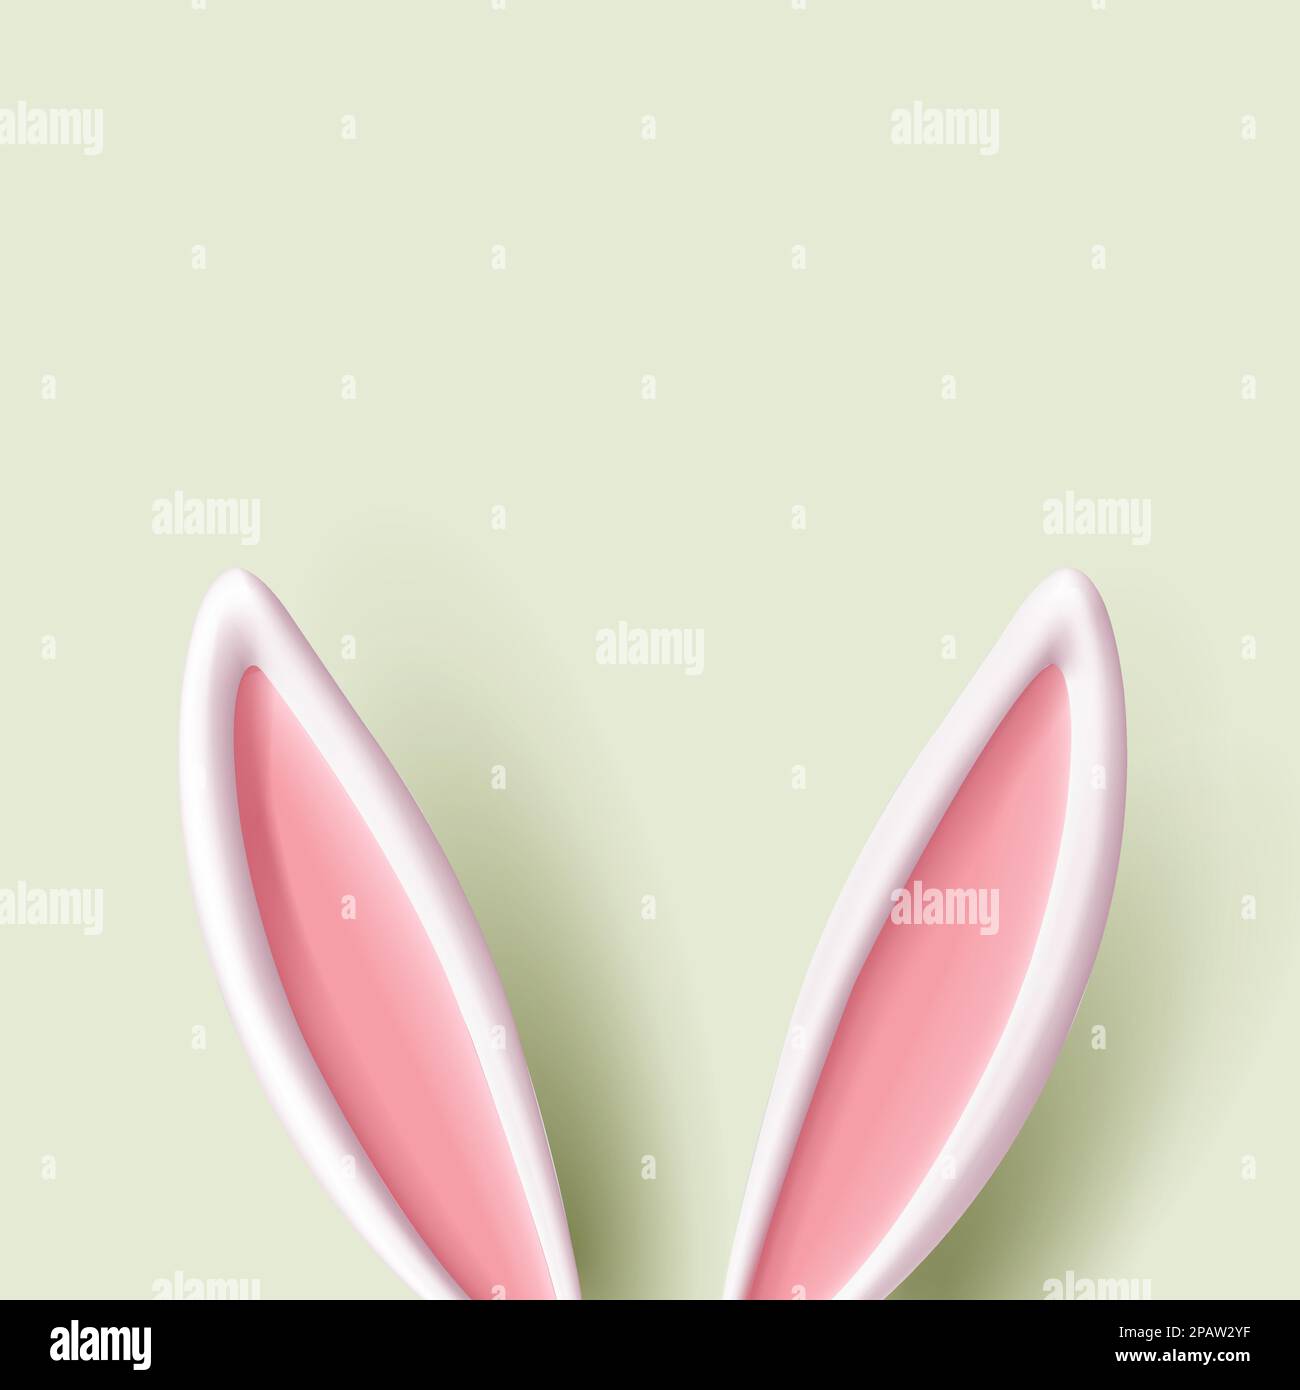 Vector template of 3D rabbit easter ears, Volume white ears with girly pink inner part of the Easter Bunny. Funny cartoon illustration for greeting ca Stock Vector